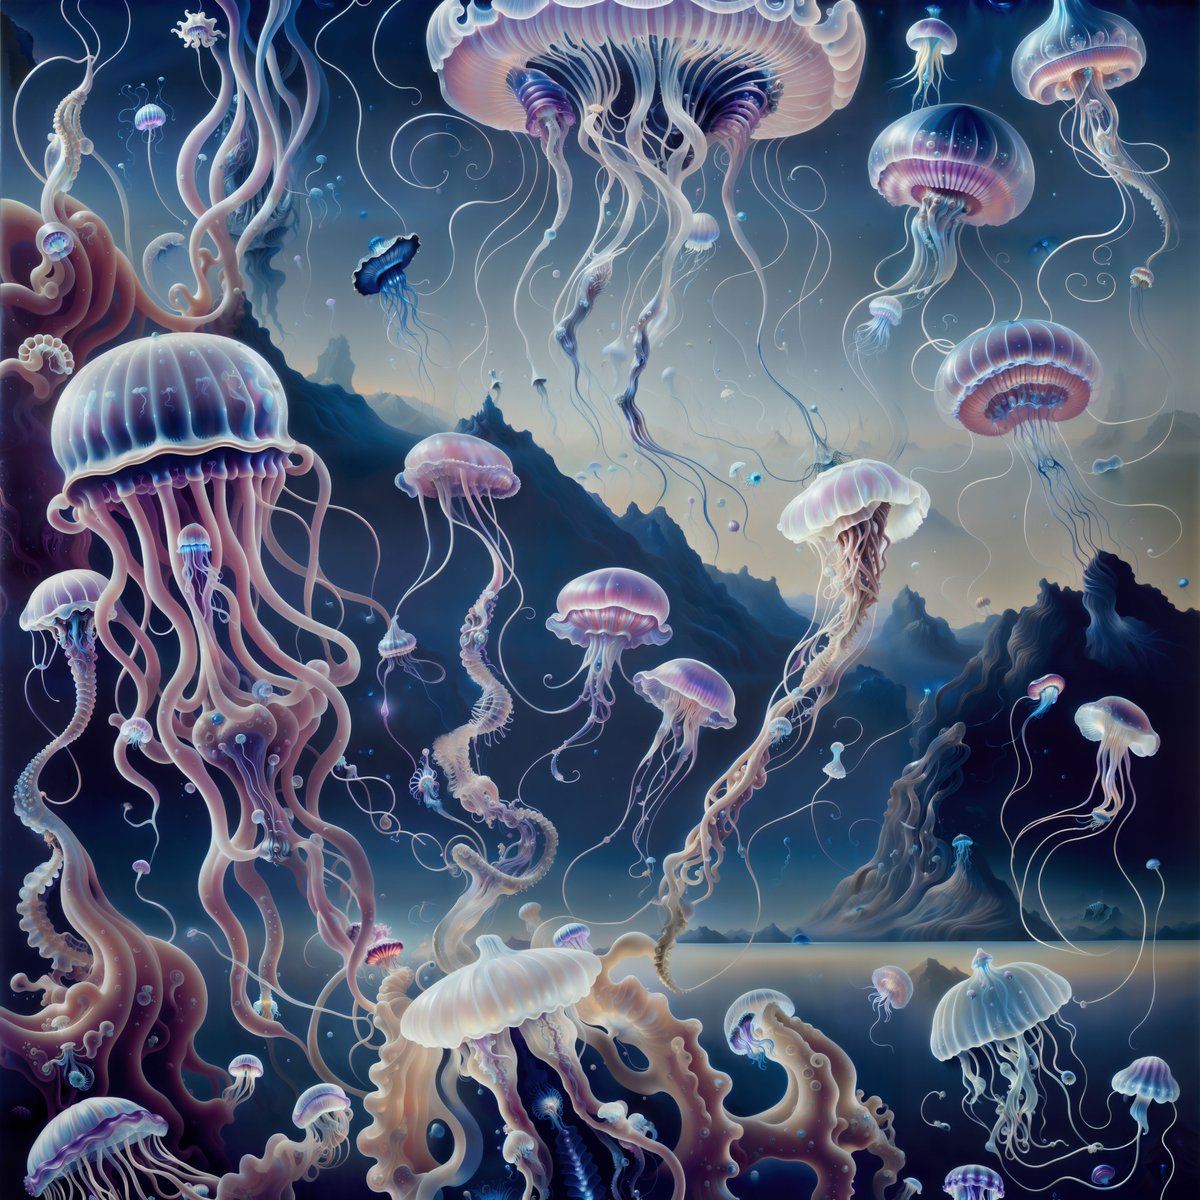 Jellyfish Mountainscapes

Exploring surreal landscapes with #etv8